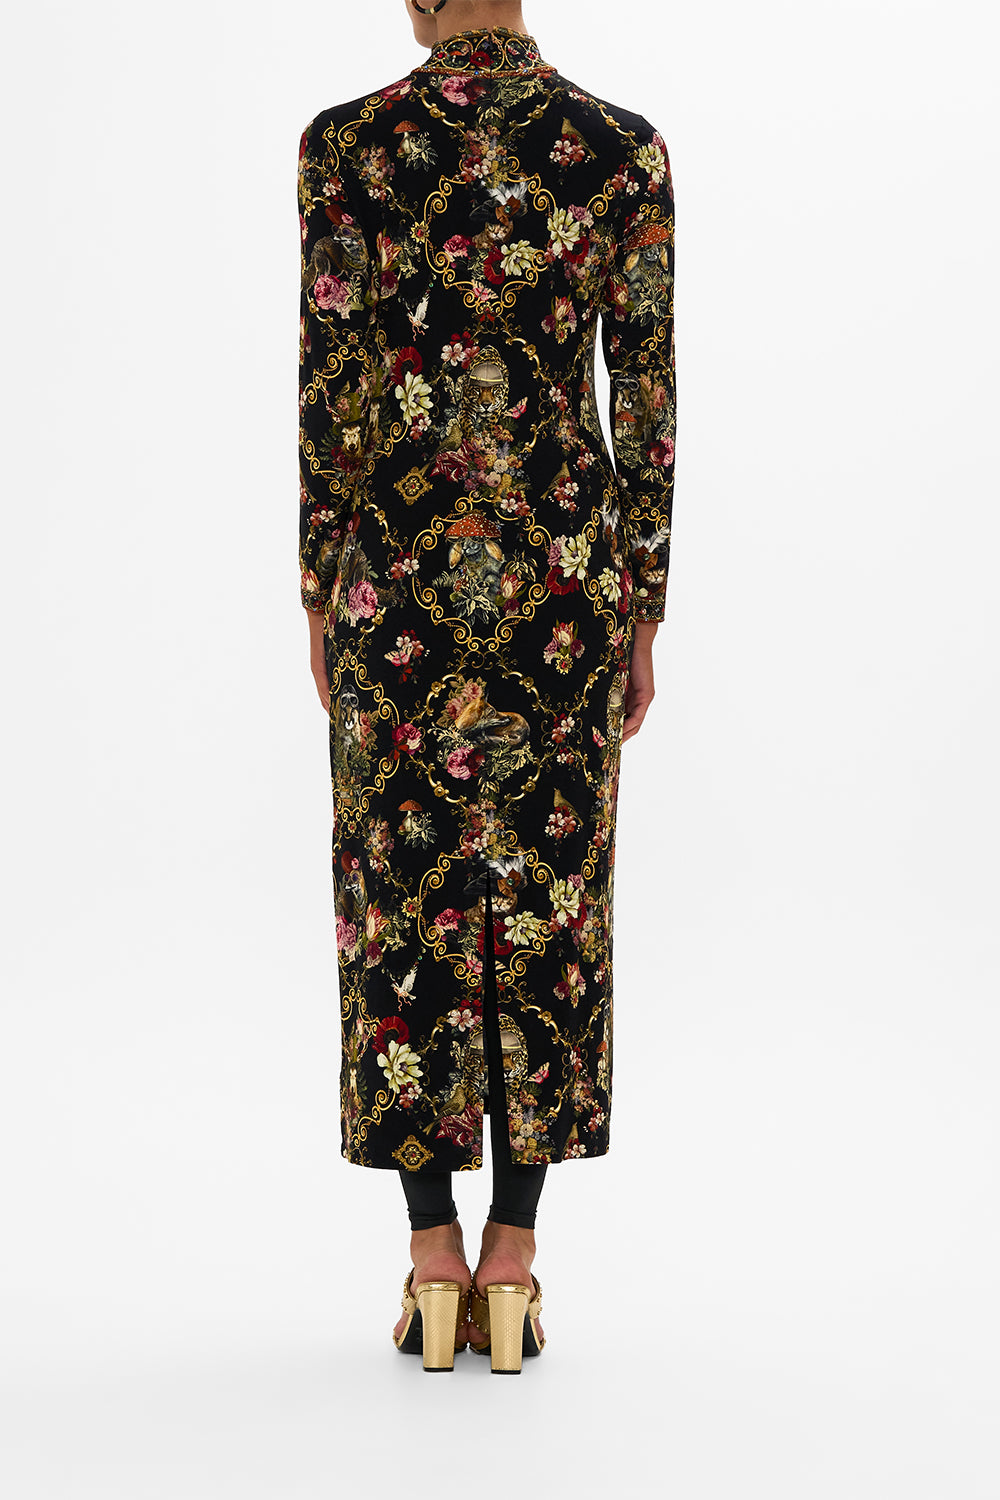 TURTLENECK JERSEY DRESS TOLD IN THE TAPESTRY